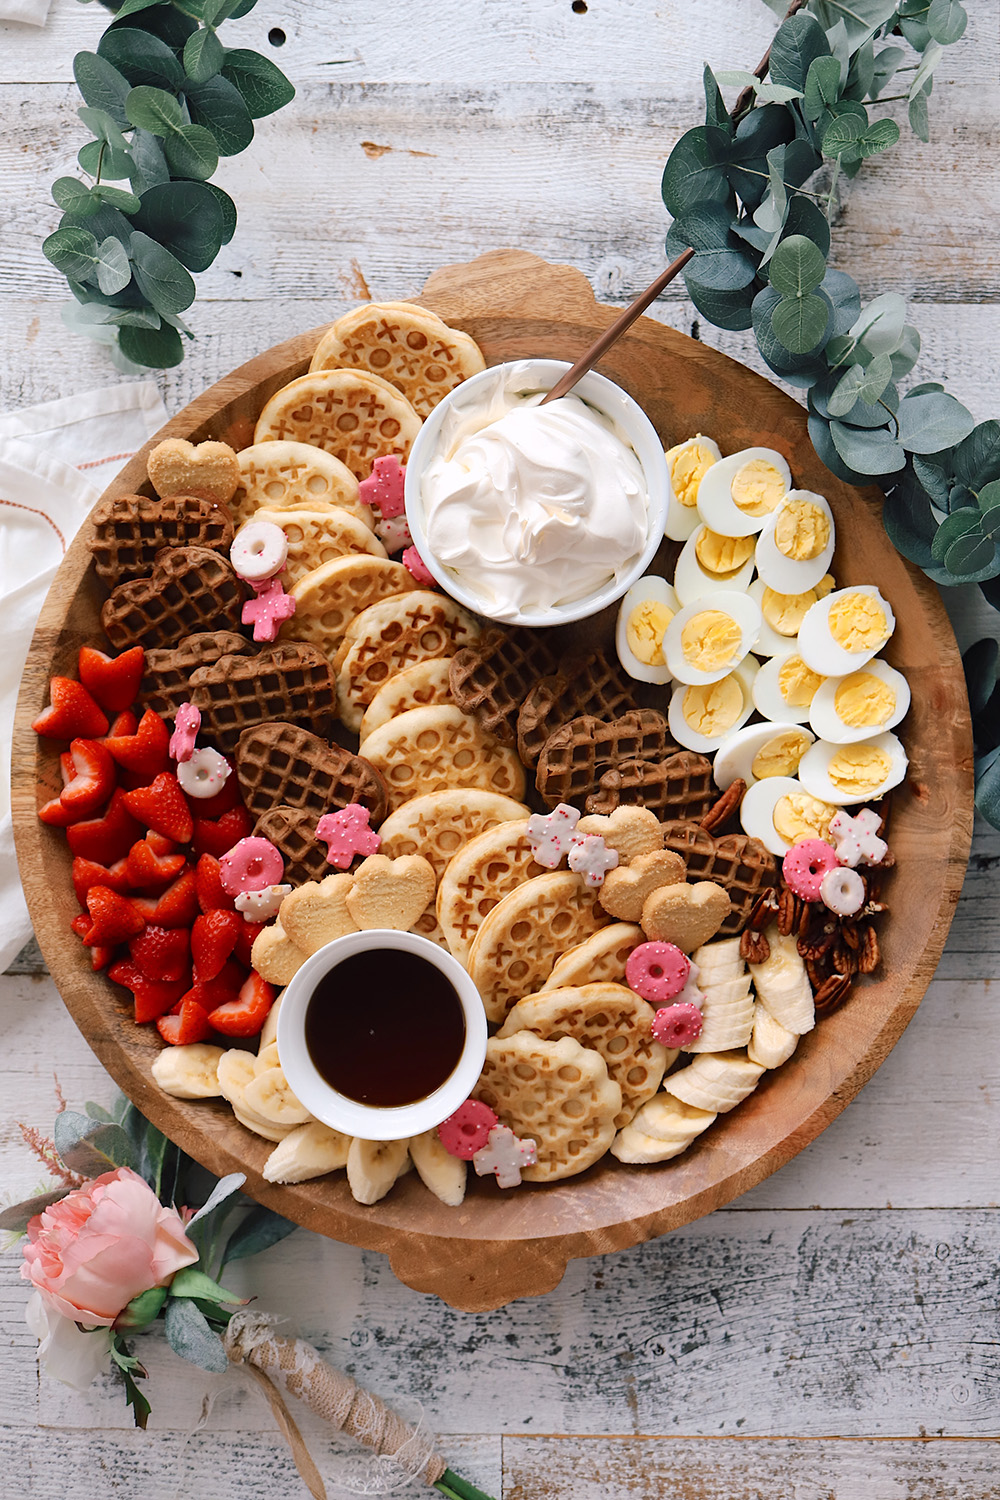 Valentine Breakfast Board with Chocolate Heart Waffles featured by top US lifestyle blogger, Tabitha Blue of Fresh Mommy Blog.